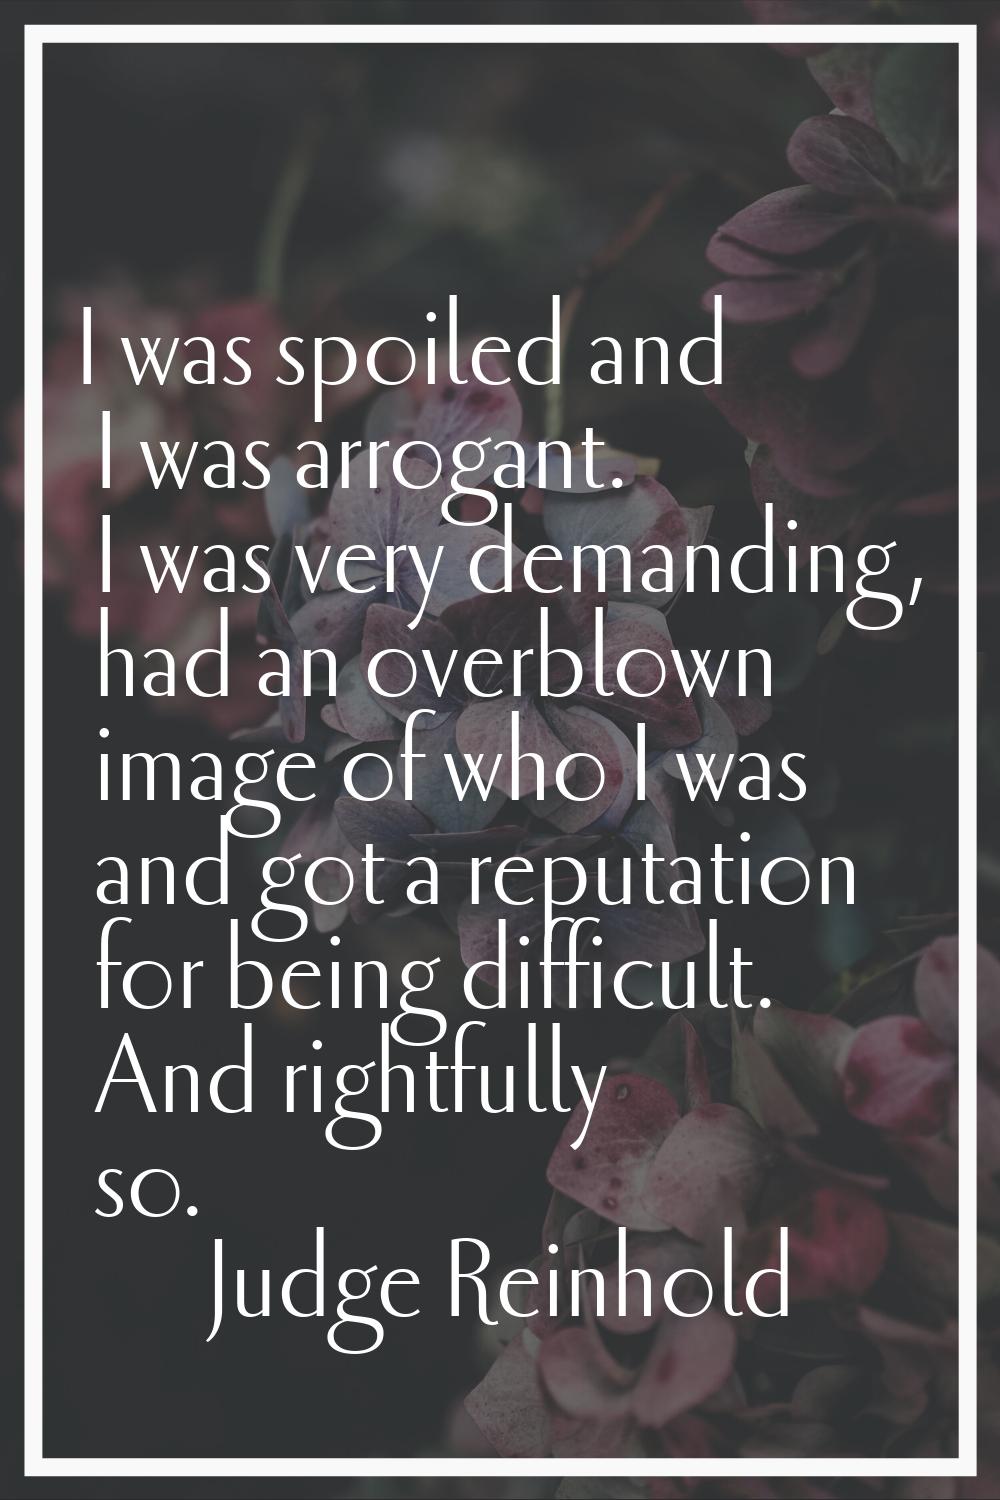 I was spoiled and I was arrogant. I was very demanding, had an overblown image of who I was and got